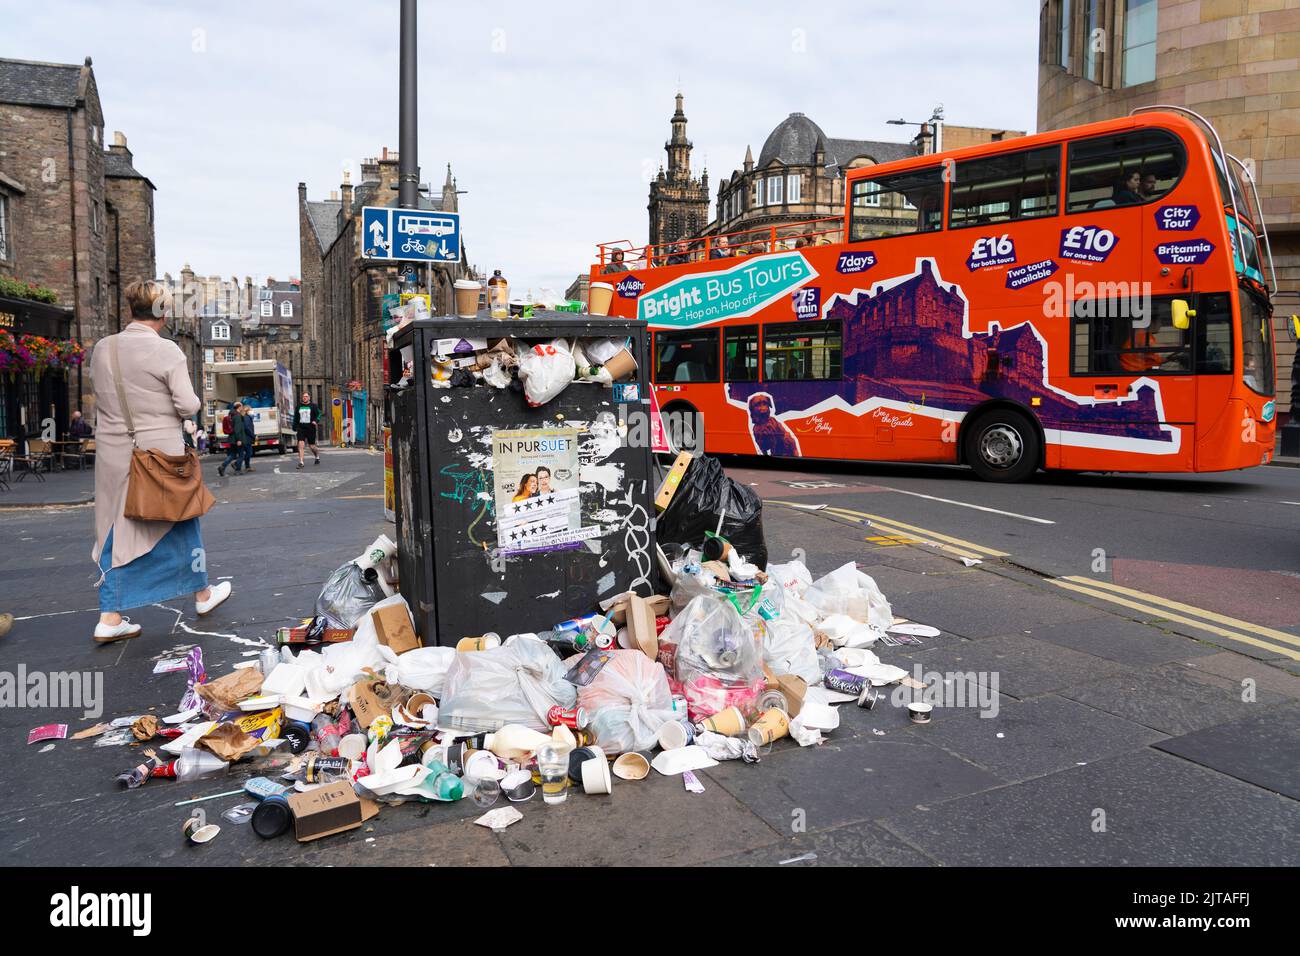 Edinburgh, Scotland, UK. 29th August 2022. Edinburgh bin men strike in second week and the city’s streets are covered in litter from overflowing rubbish bins. Pic; Tourist tour bus passes overflowing bin.  Iain Masterton/Alamy Live News Stock Photo